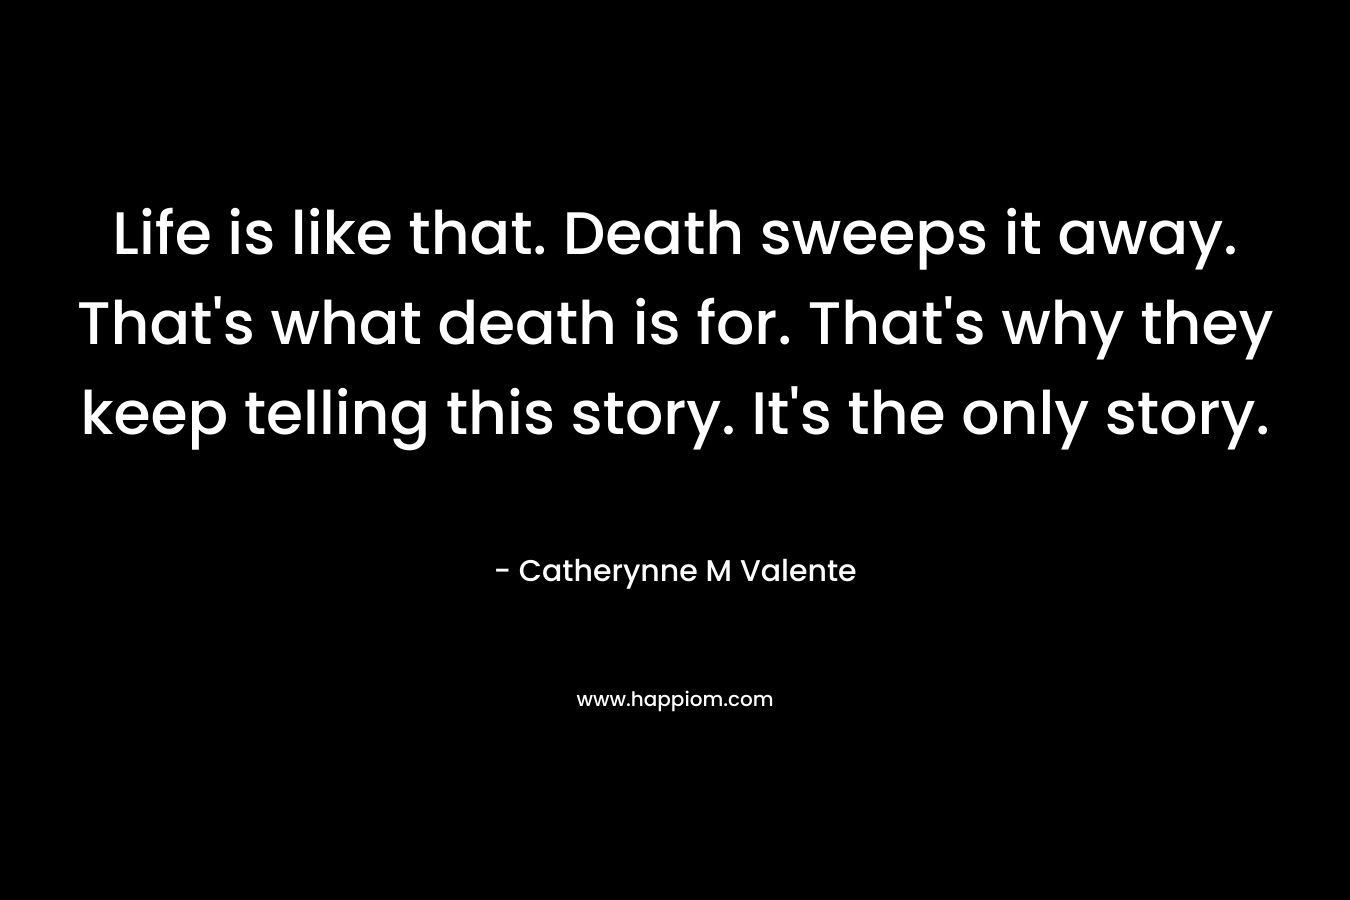 Life is like that. Death sweeps it away. That’s what death is for. That’s why they keep telling this story. It’s the only story. – Catherynne M Valente